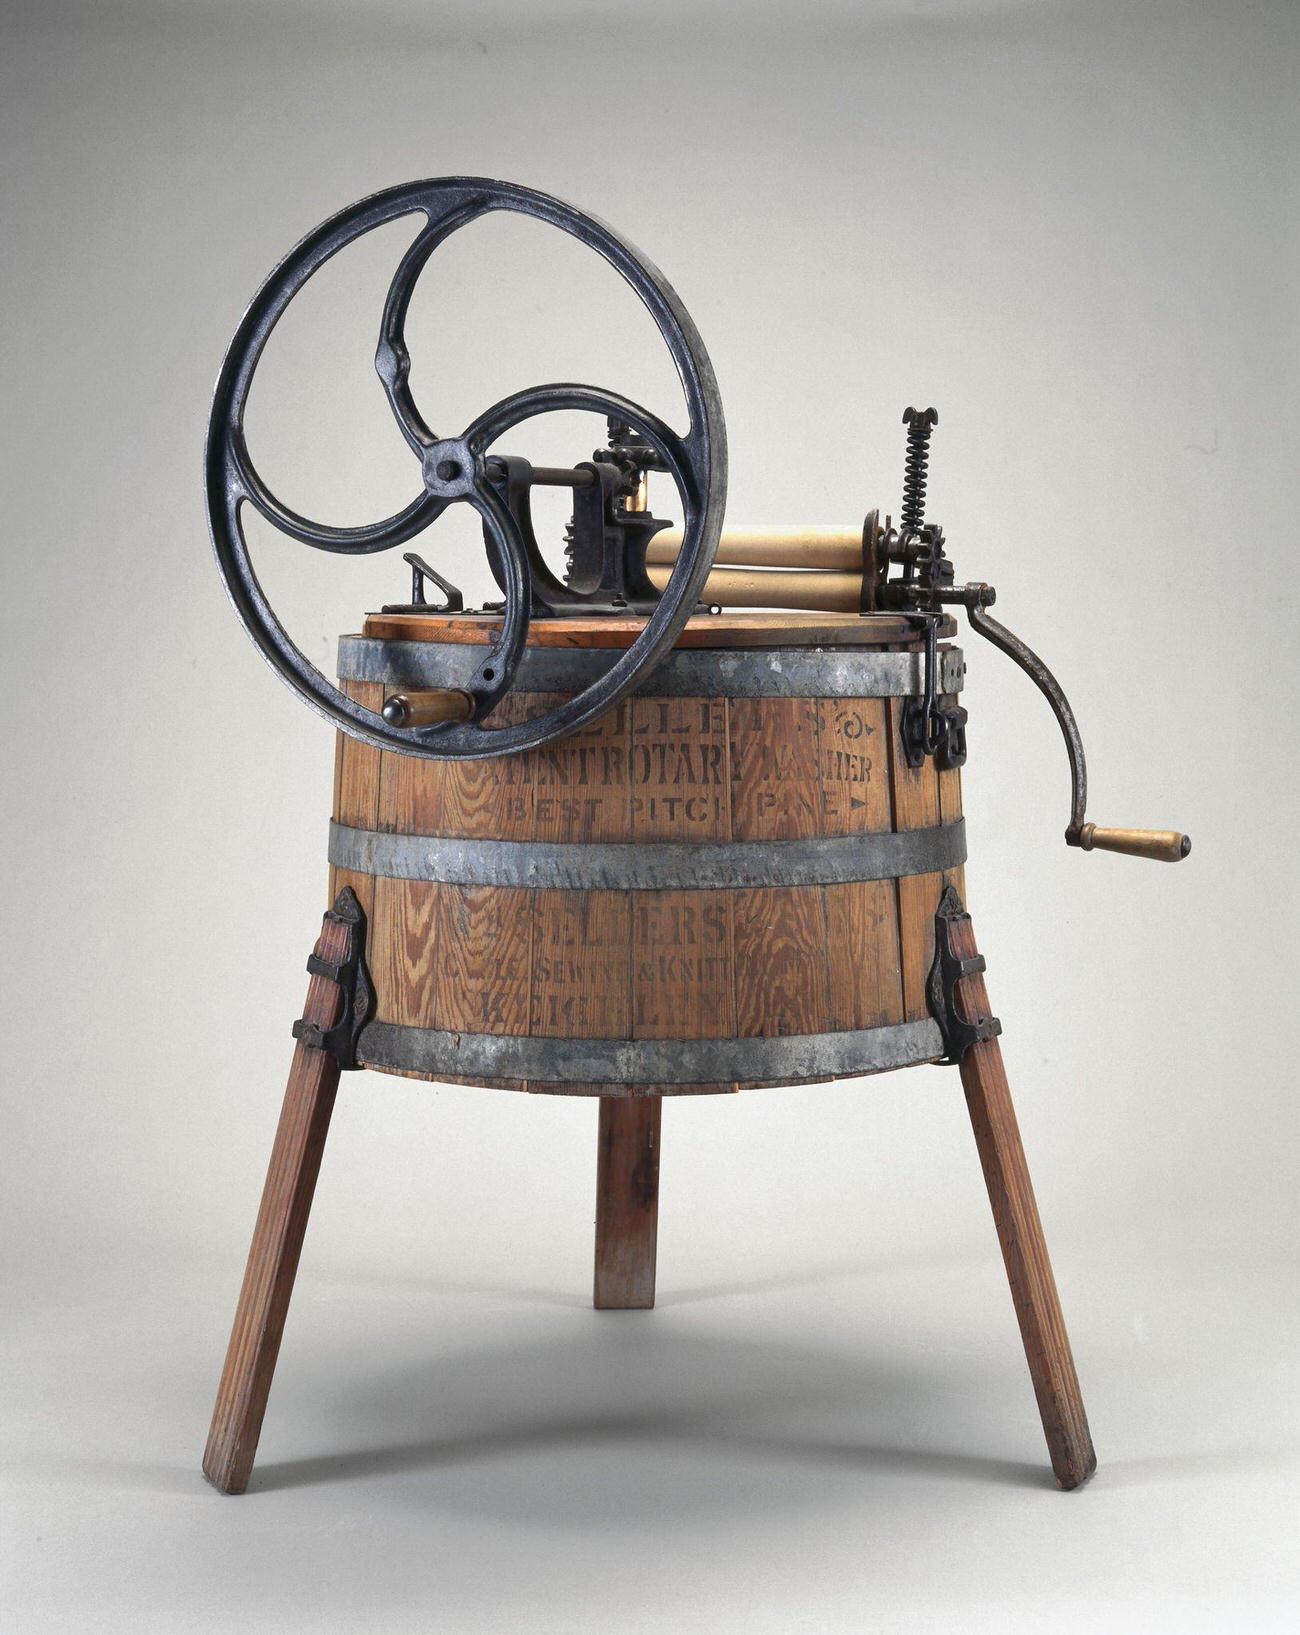 Hand-operated wooden washing machine by William Sellers, 1890.